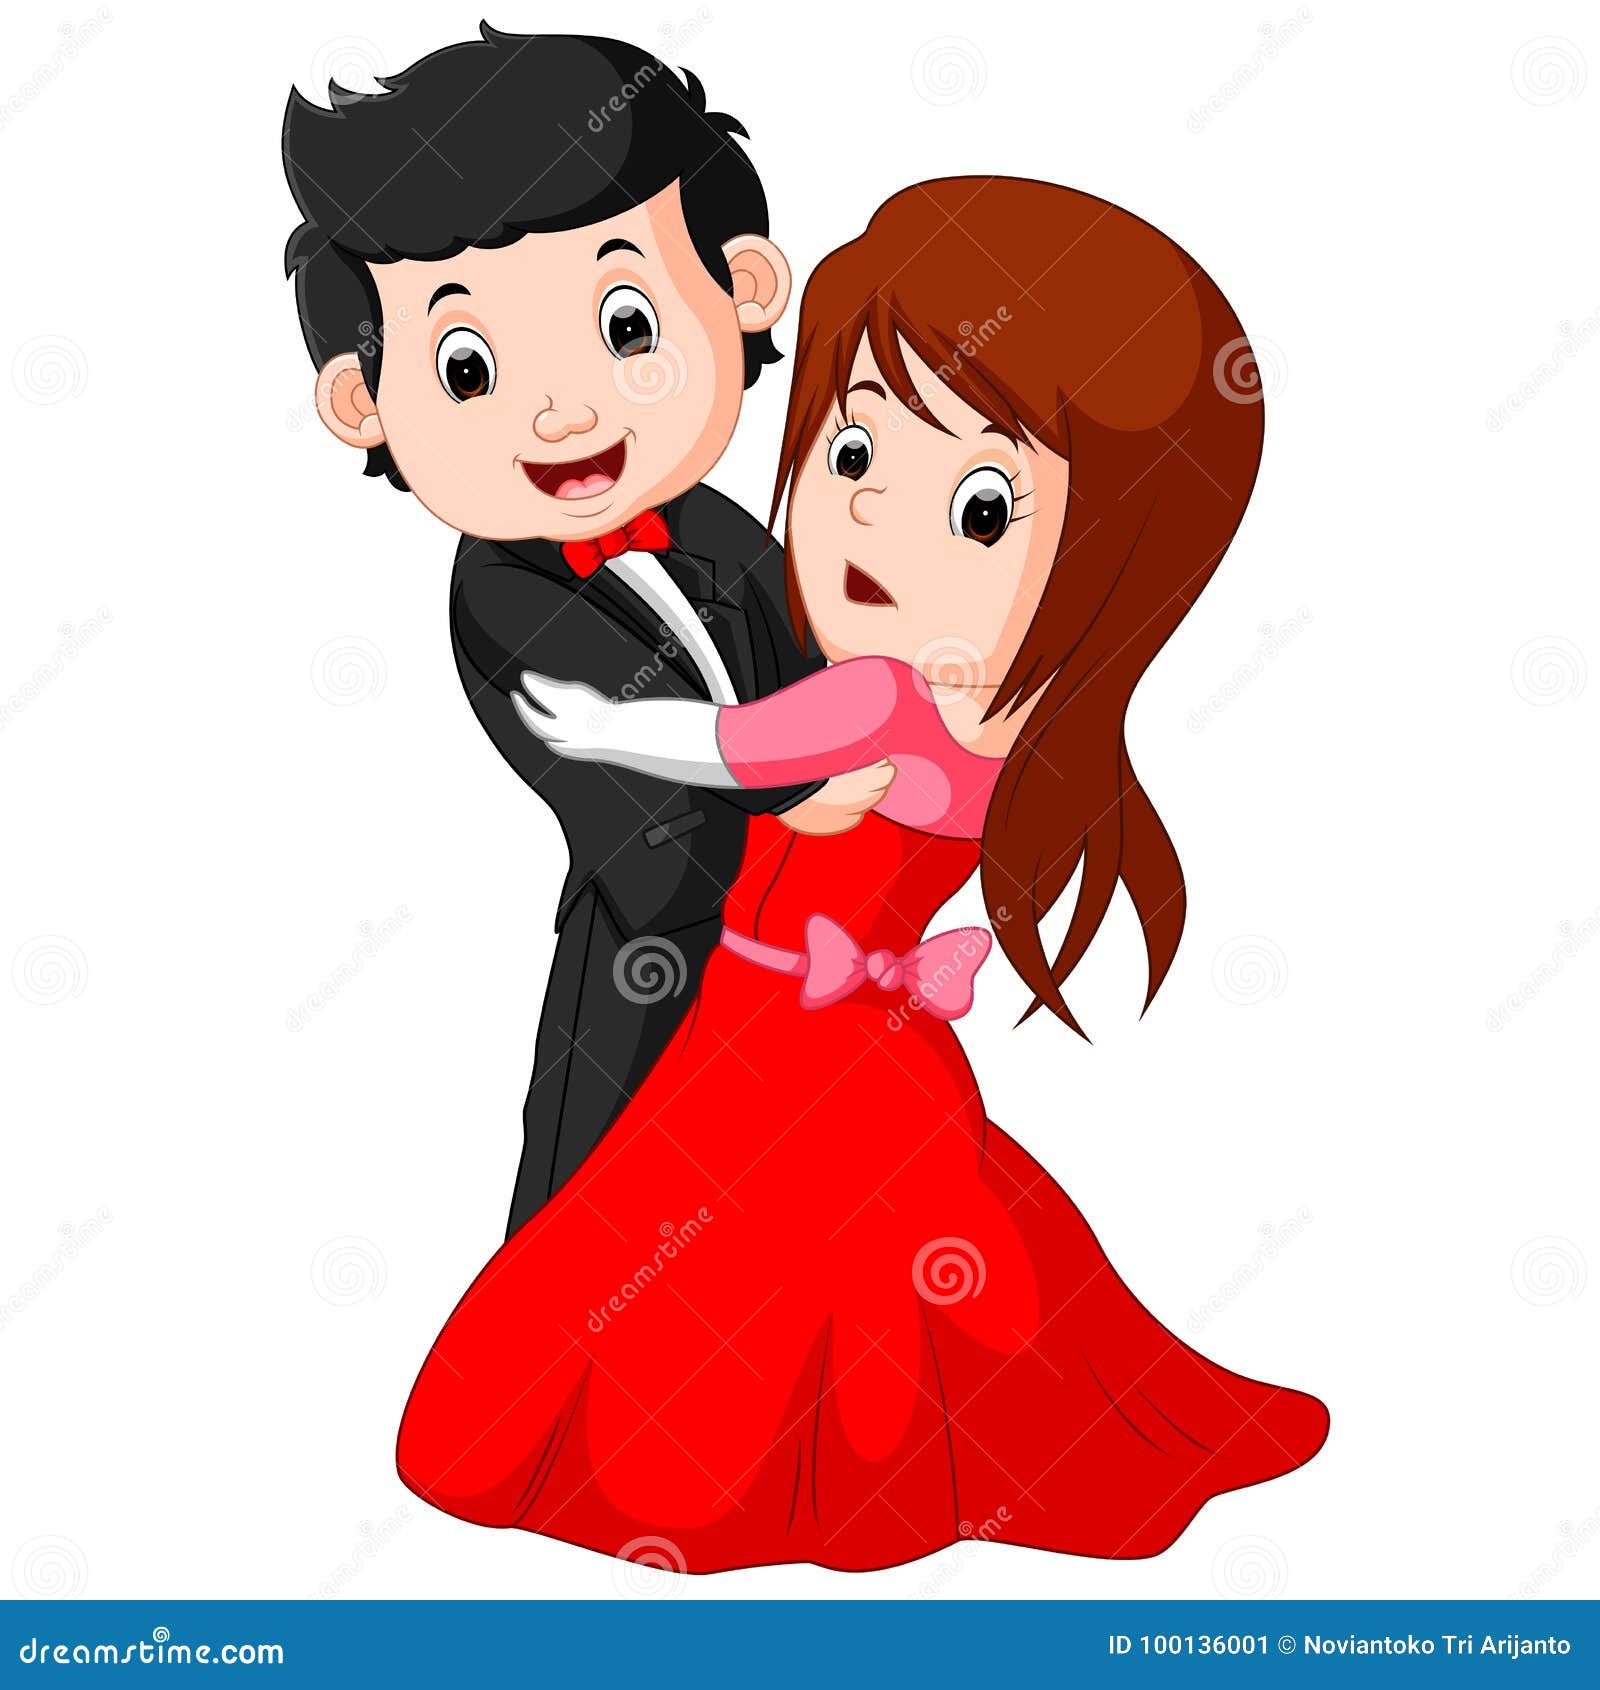 Cartoon Young Boy and Girl Dancing Stock Vector - Illustration of pair,  playing: 100136001